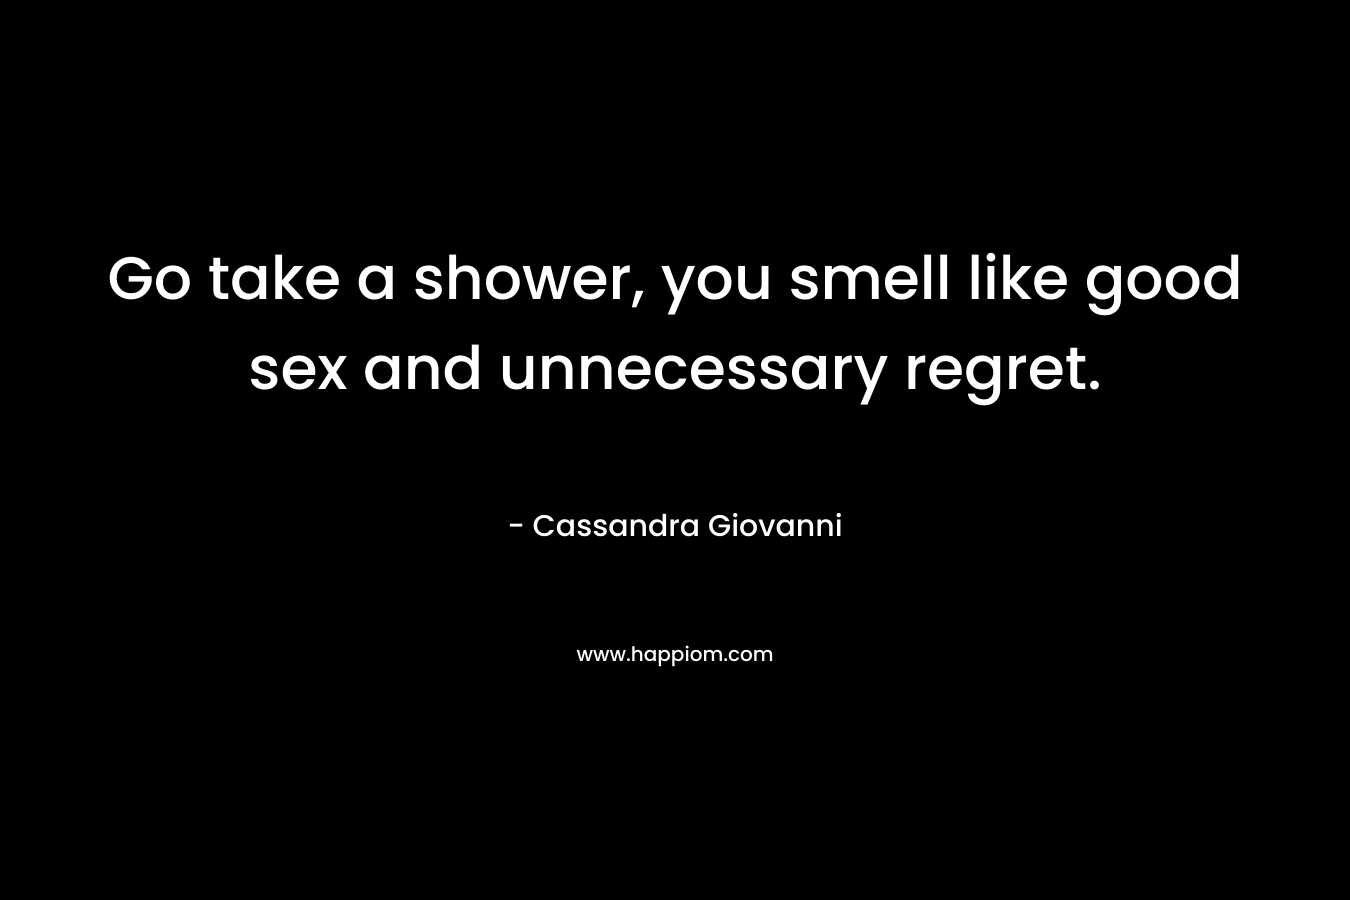 Go take a shower, you smell like good sex and unnecessary regret.